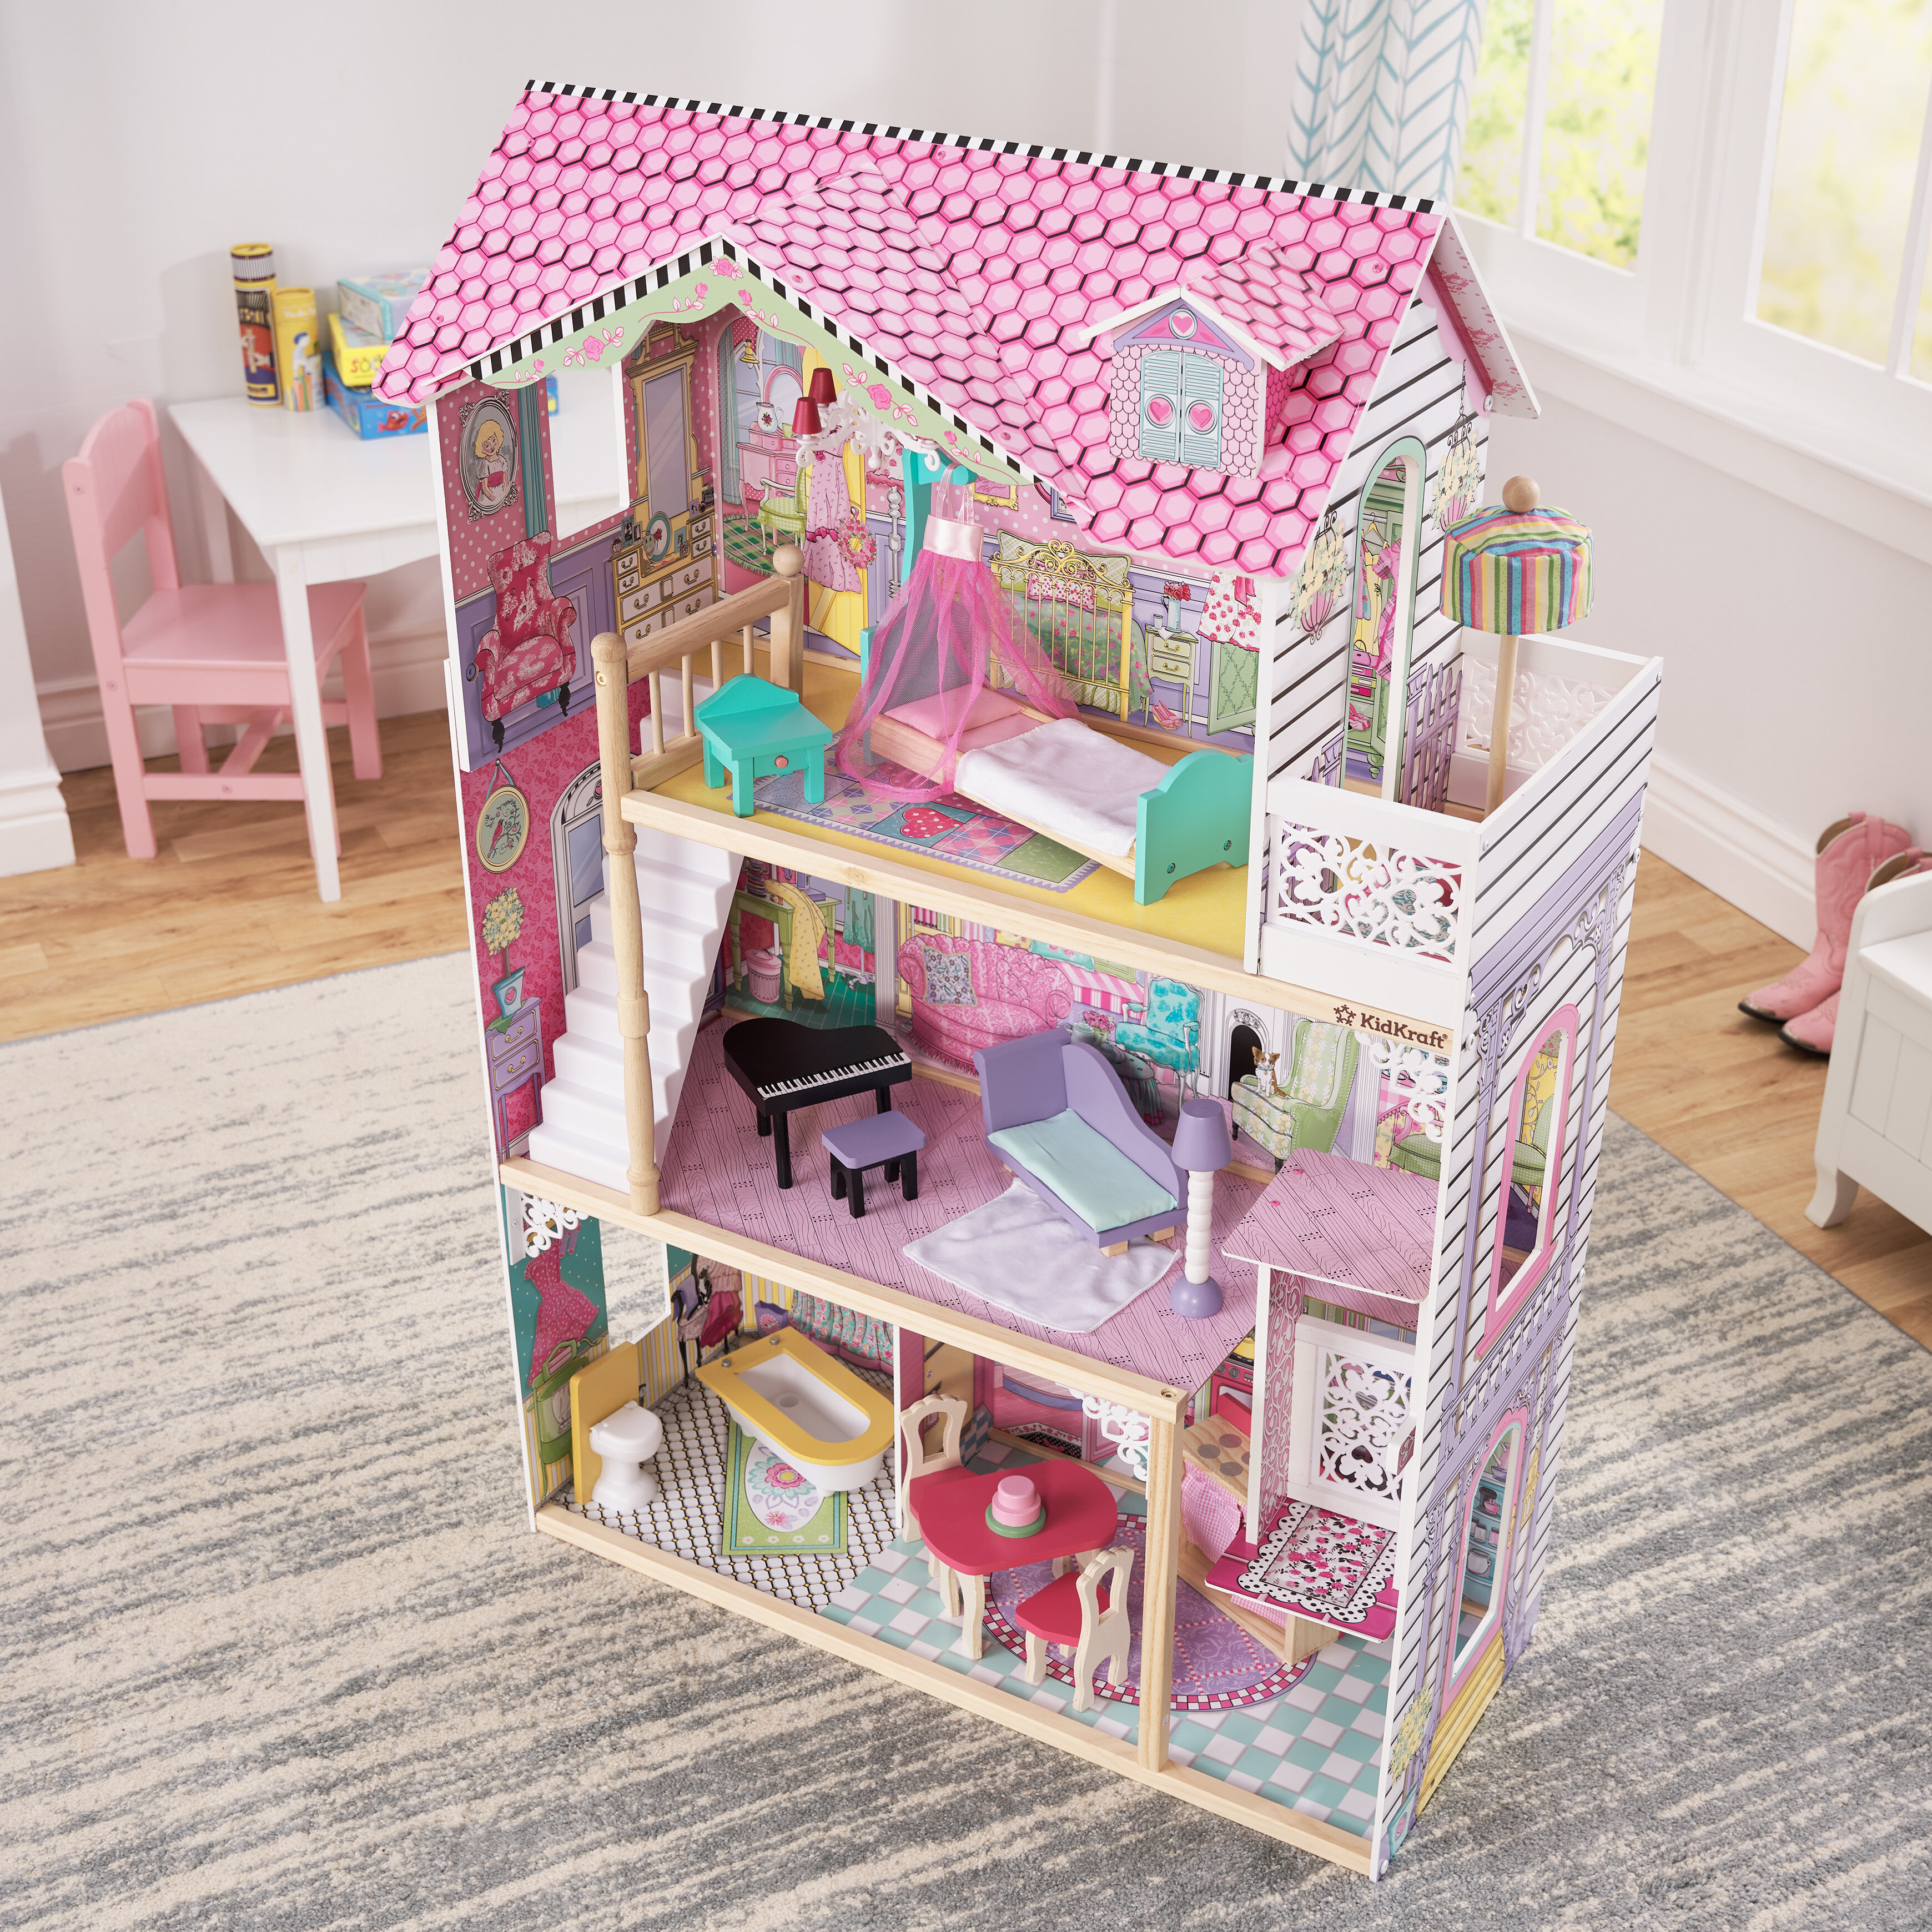 Kidkraft KidKraft Cottage Wooden Dolls House with Furniture and Accessories Dollhouse 